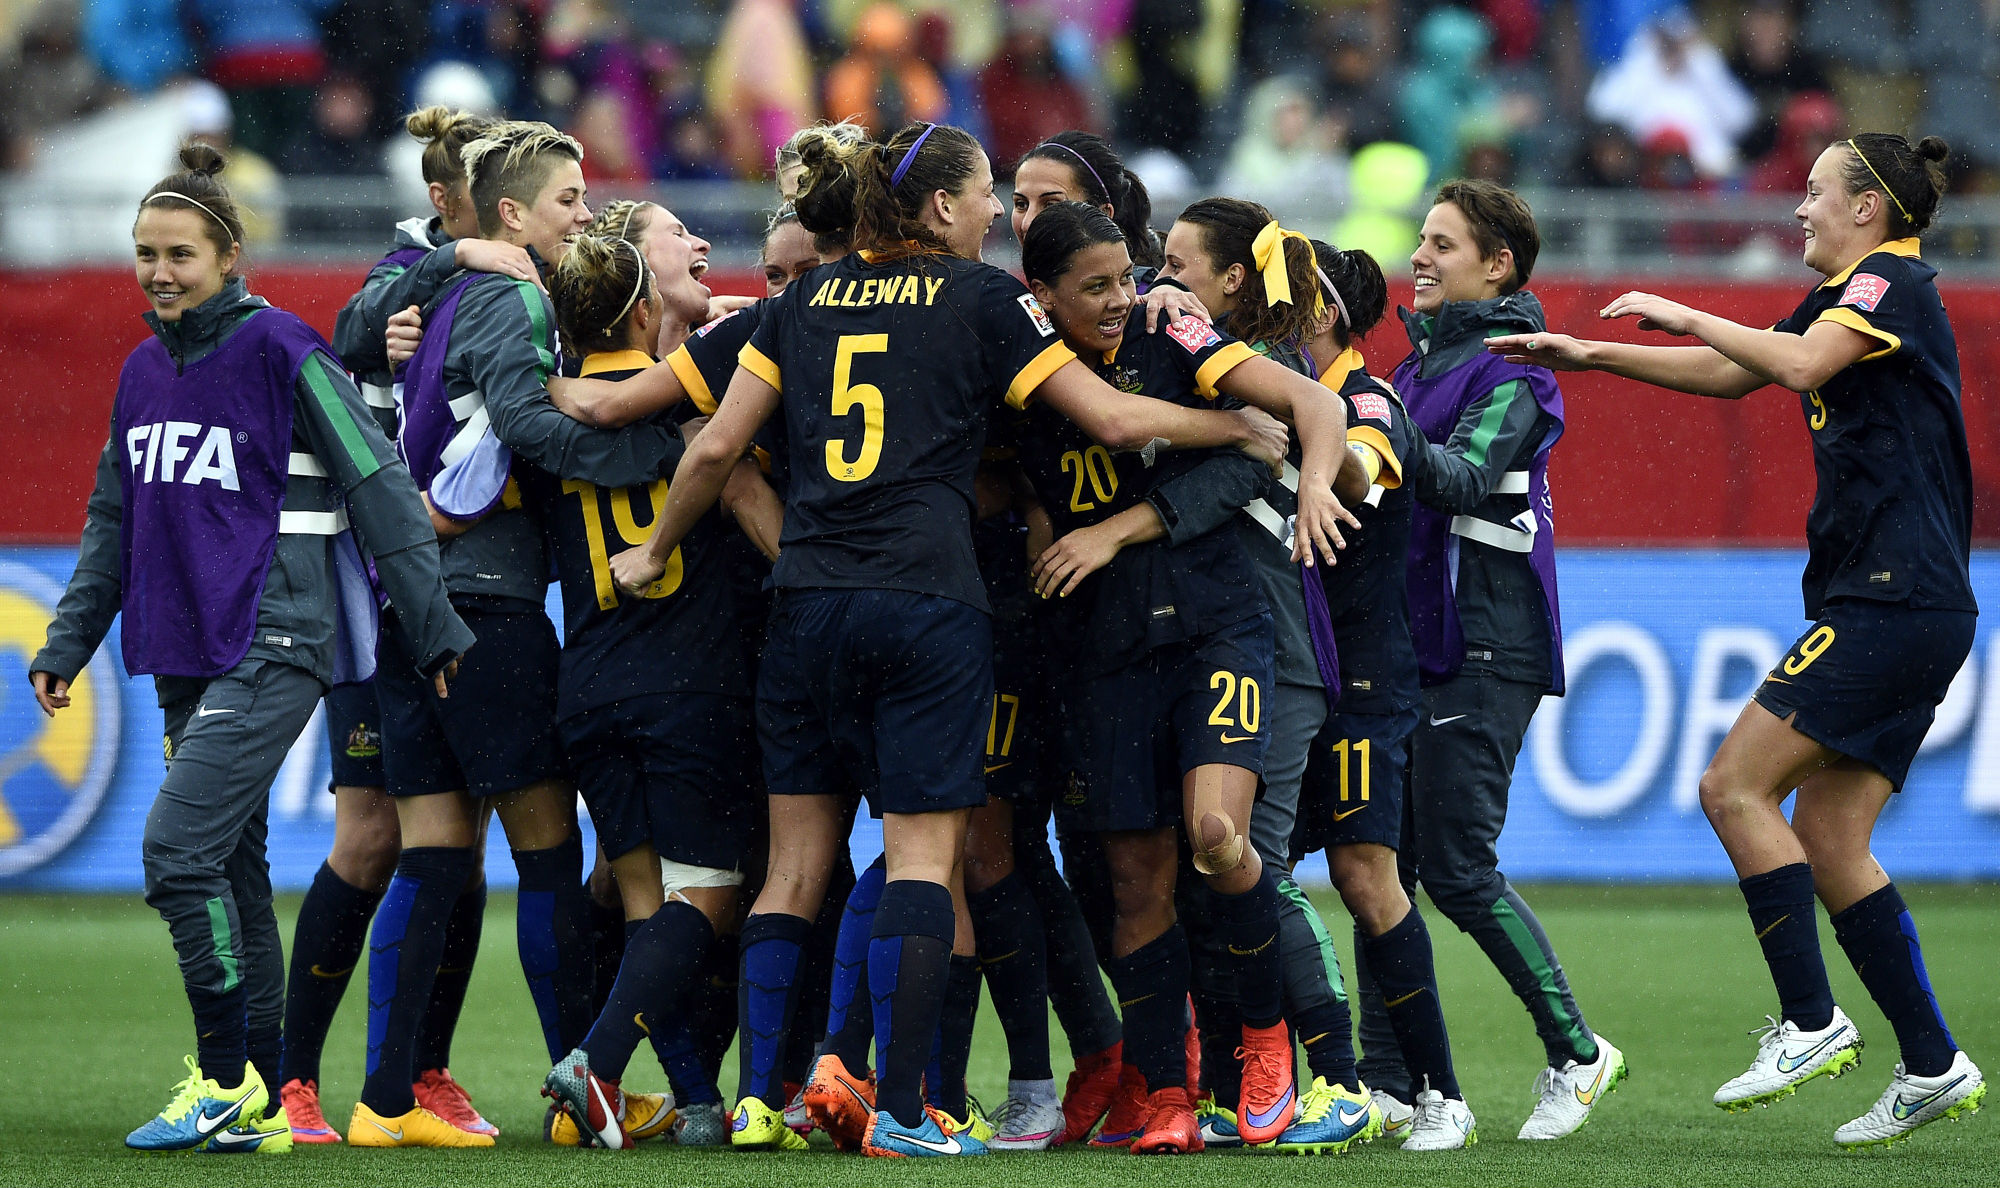 The Matildas celebrate advancing to the semi-finals after beating Brazil at FIFA Women's World Cup Canada 2015​​